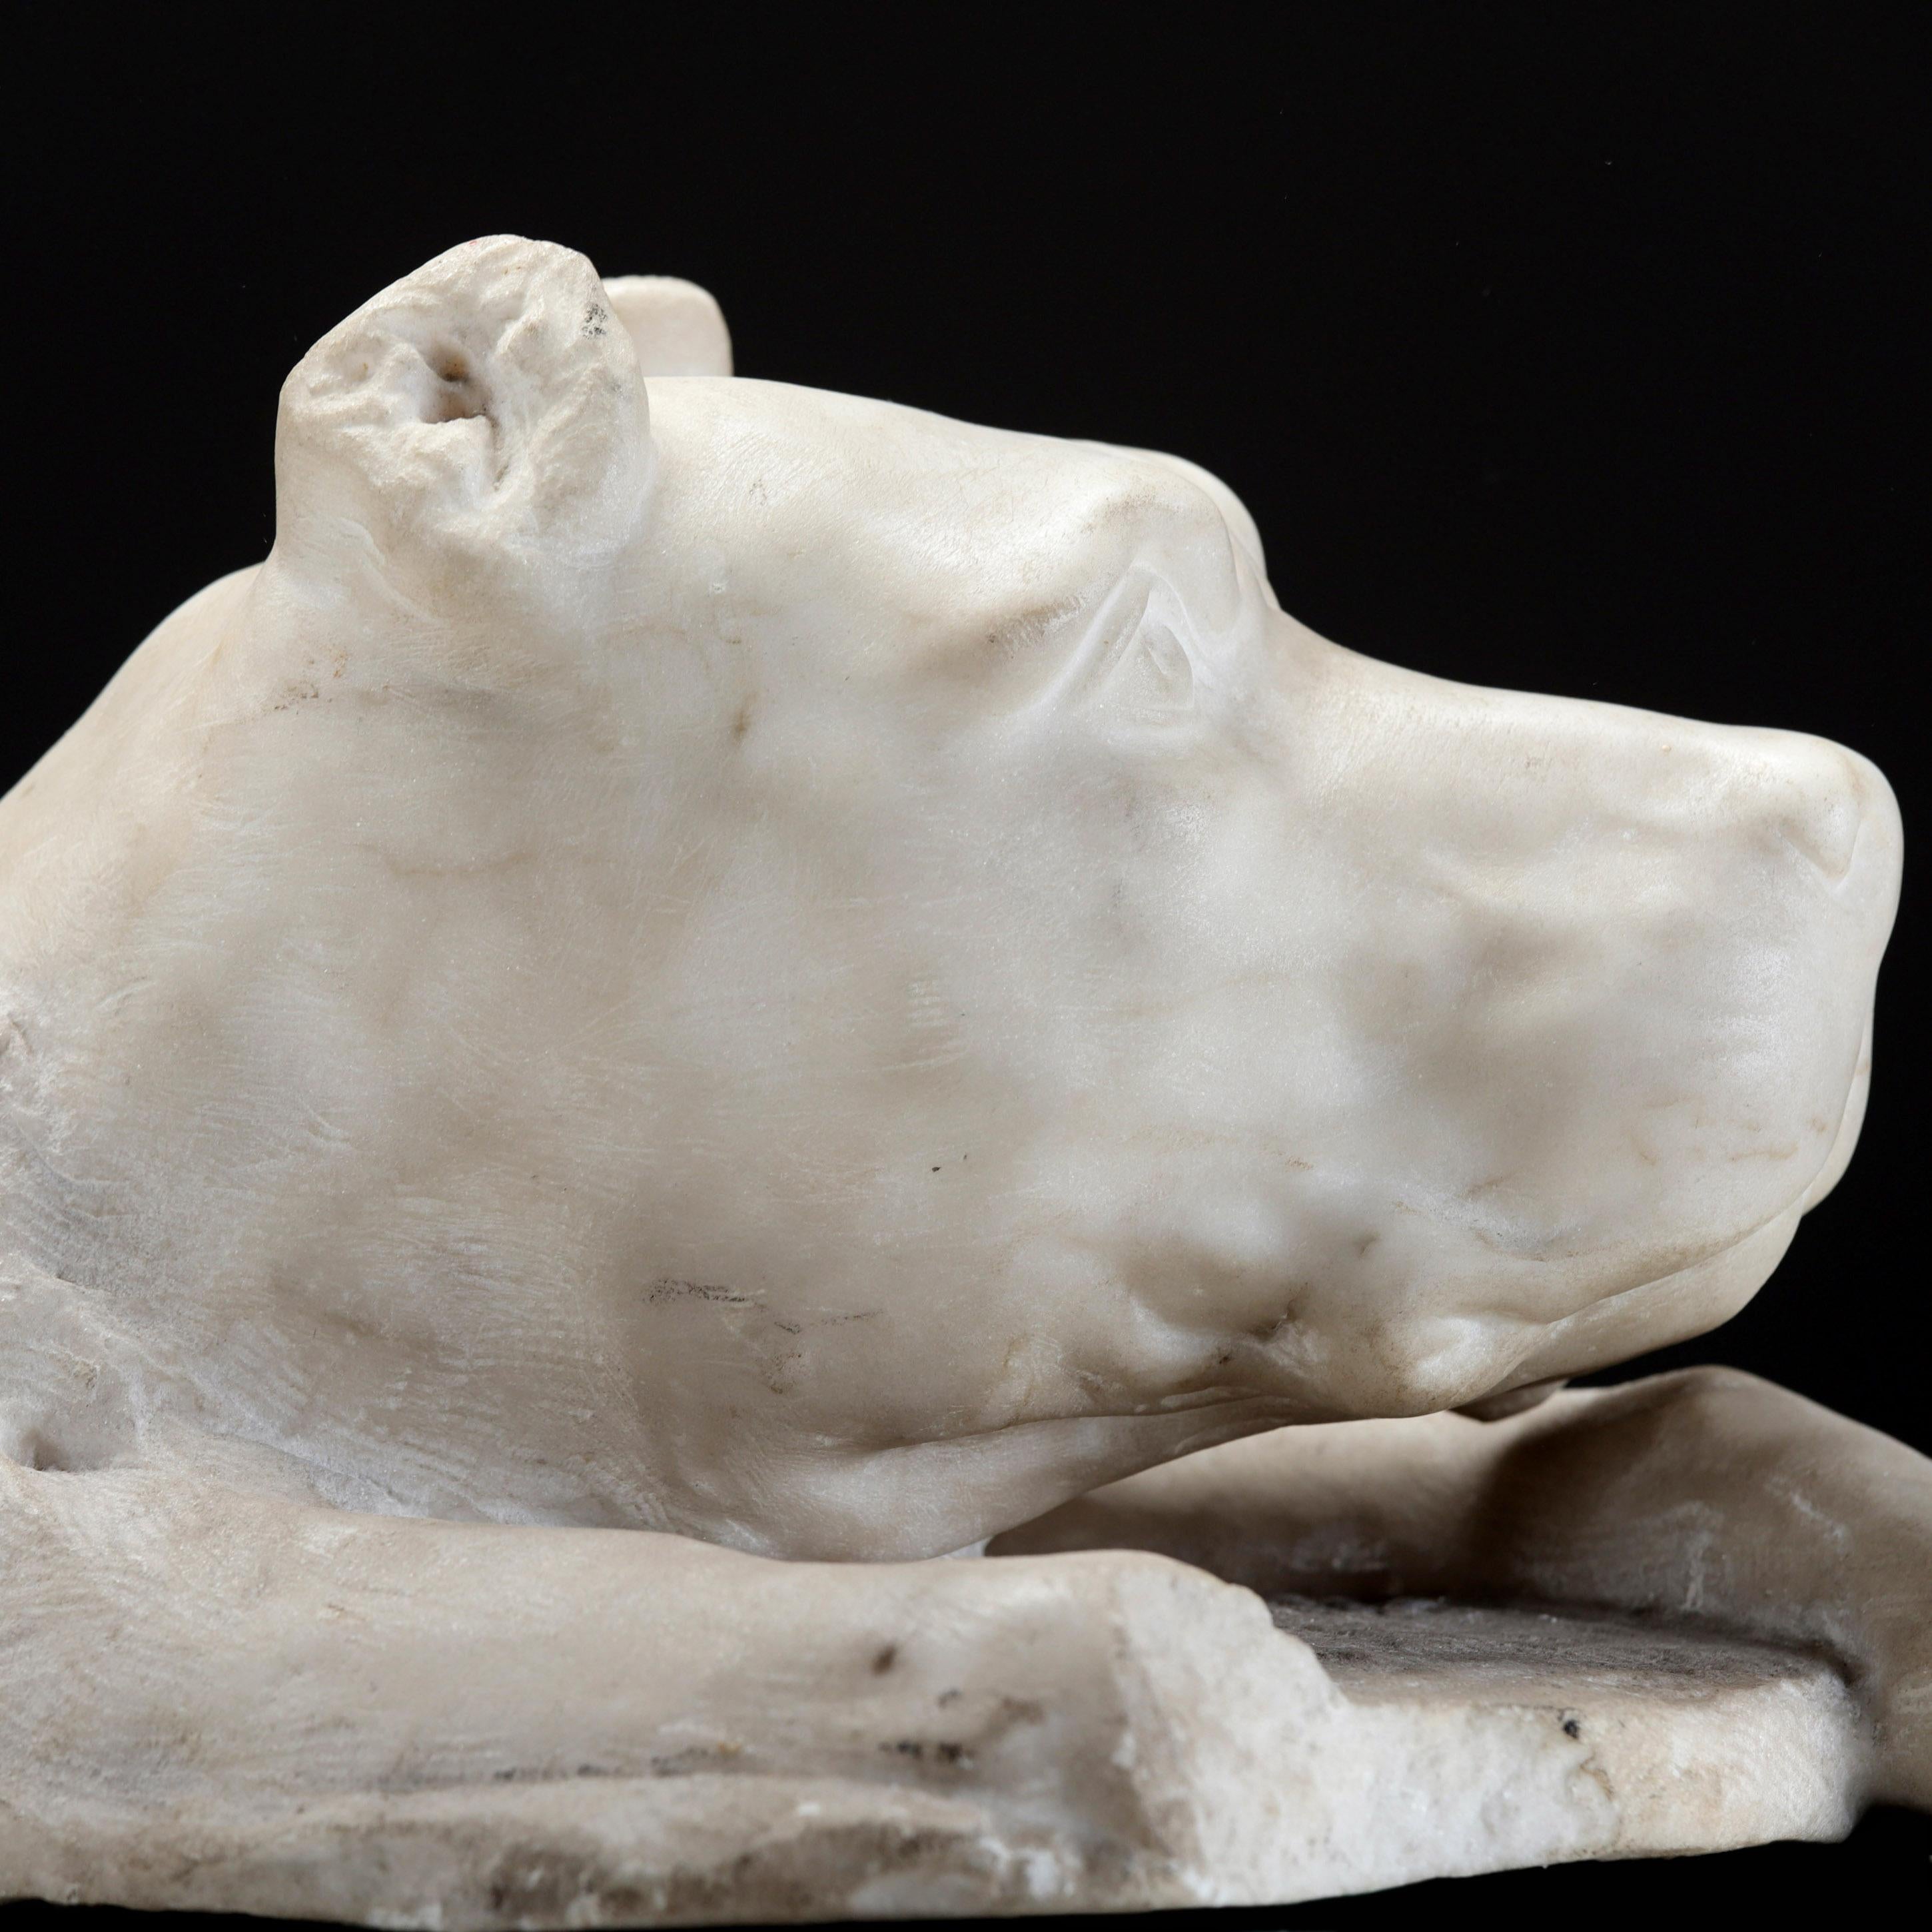 AN ITALIAN  CARVED MARBLE STUDY OF A CANE CORSO, 18TH CENTURY
An ancient and loyal breed, the Cane Corso, also known as an Italian Mastiff, has a long and interesting history dating back to the Roman empire.
The name Cane Corso loosely translates to